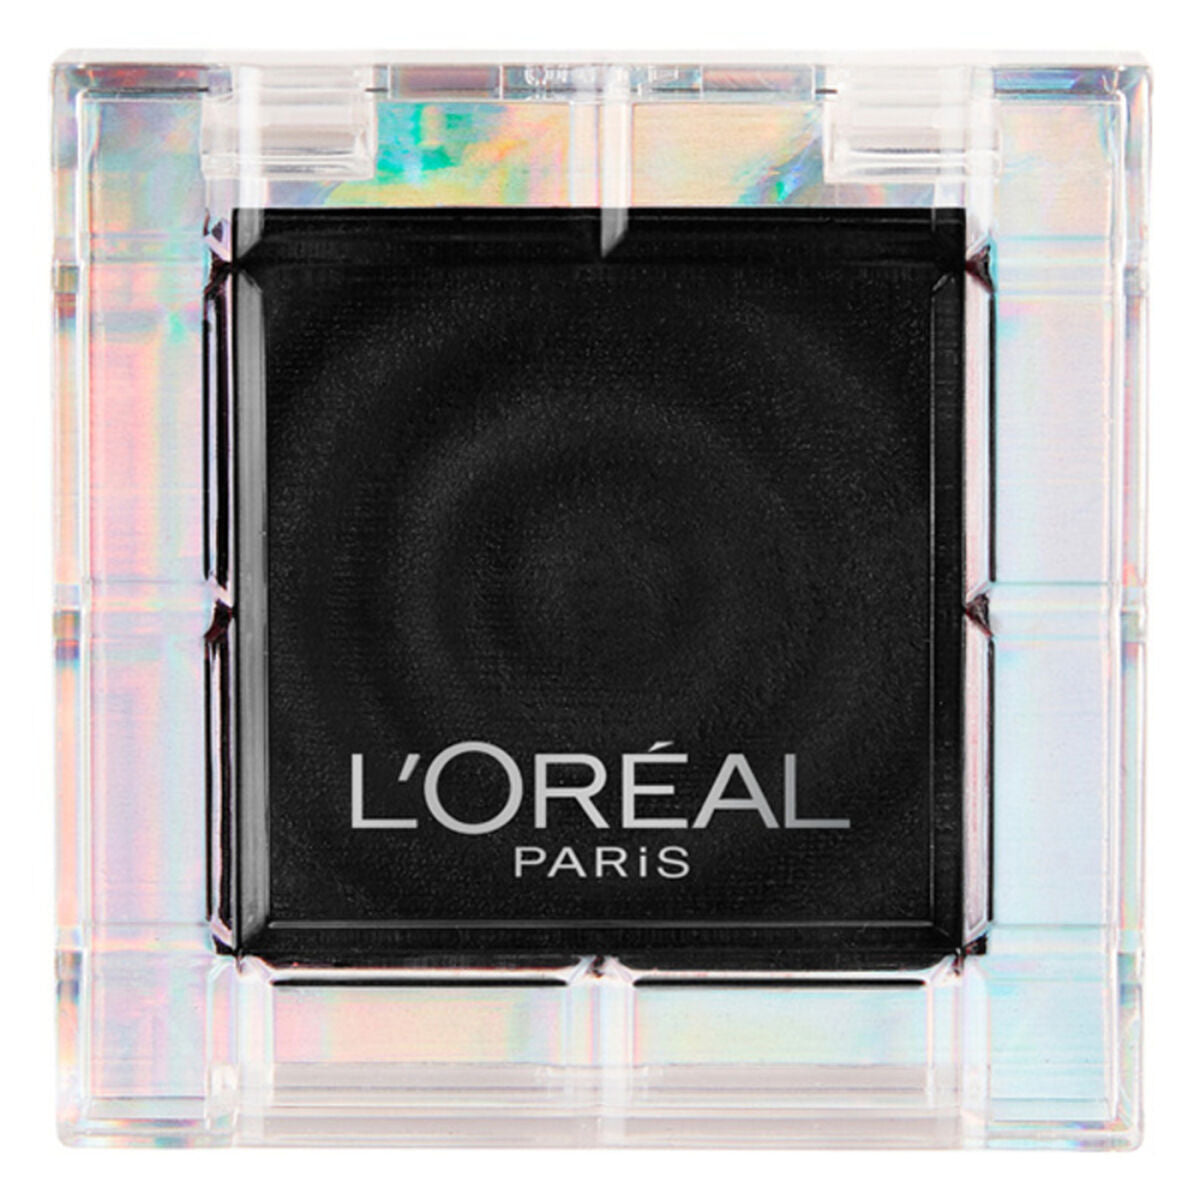 SINESHOW COILD Queen l'Oreal make up up